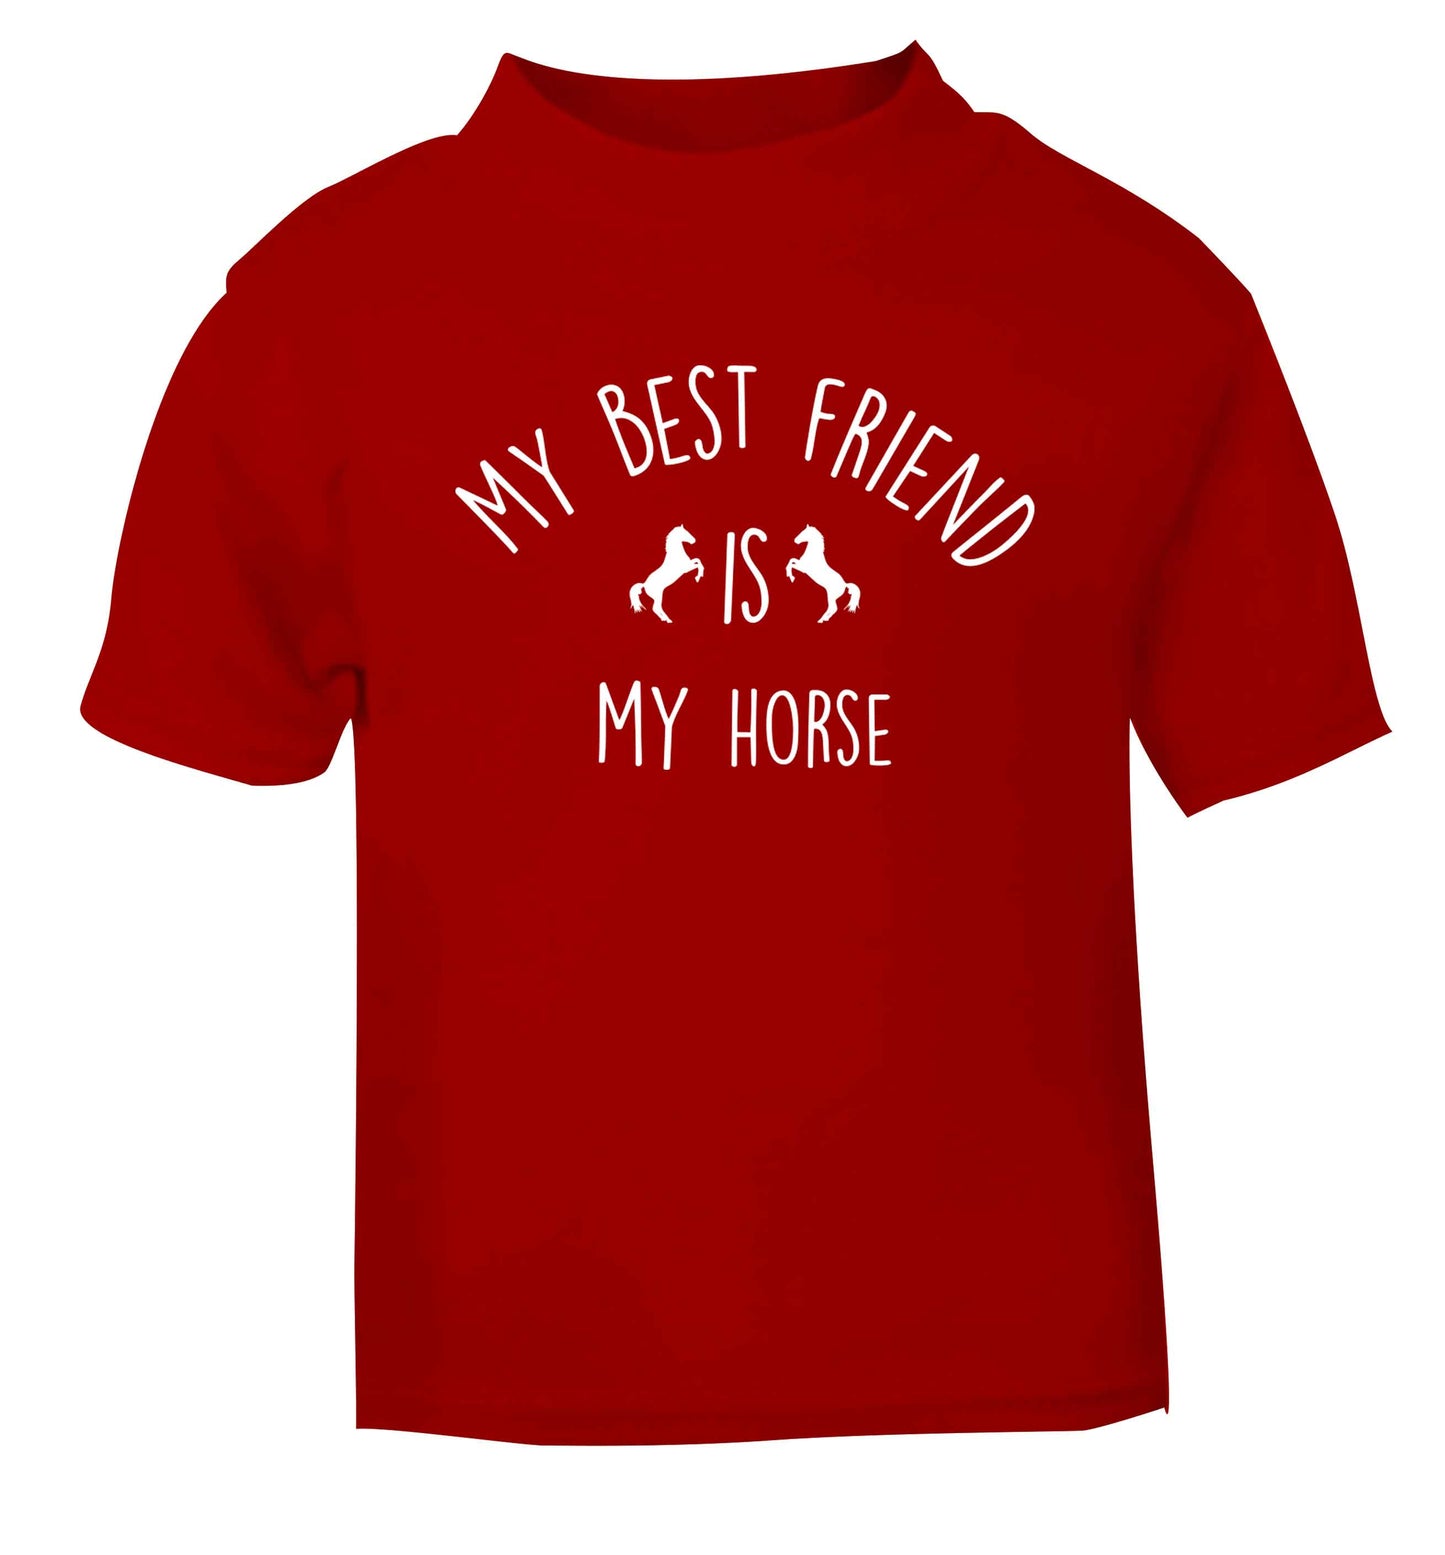 My best friend is my horse red baby toddler Tshirt 2 Years